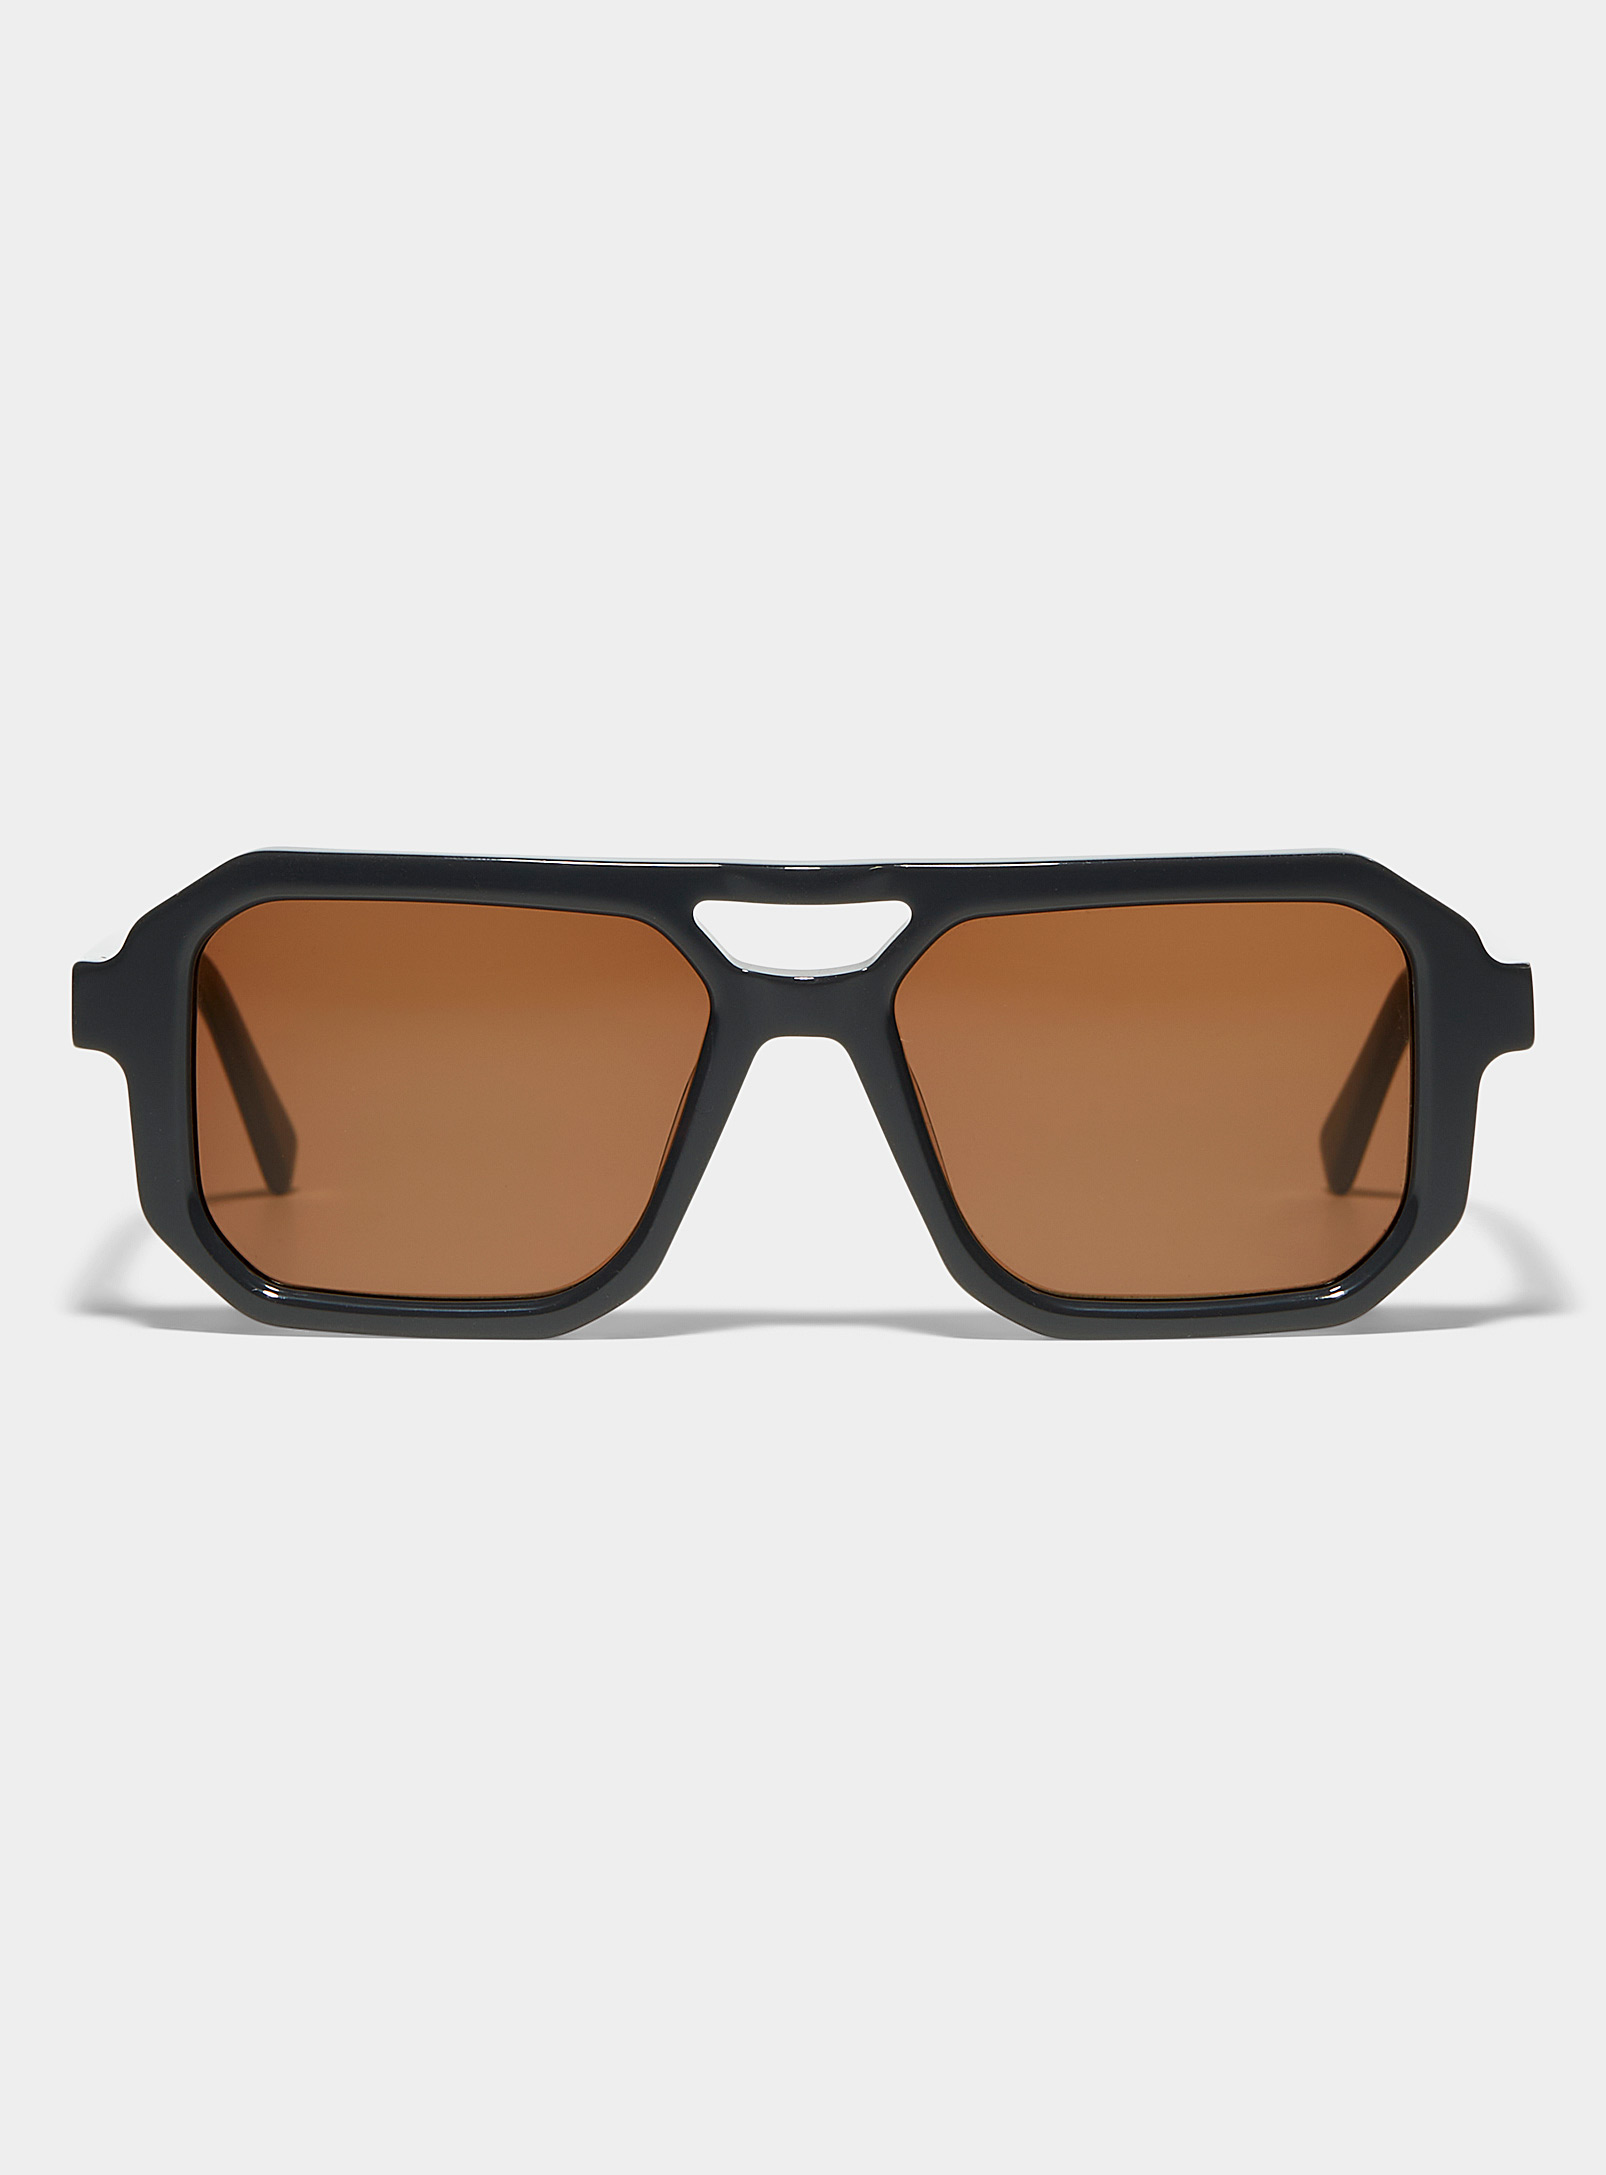 French Kiwis Cyril Square Sunglasses In Charcoal